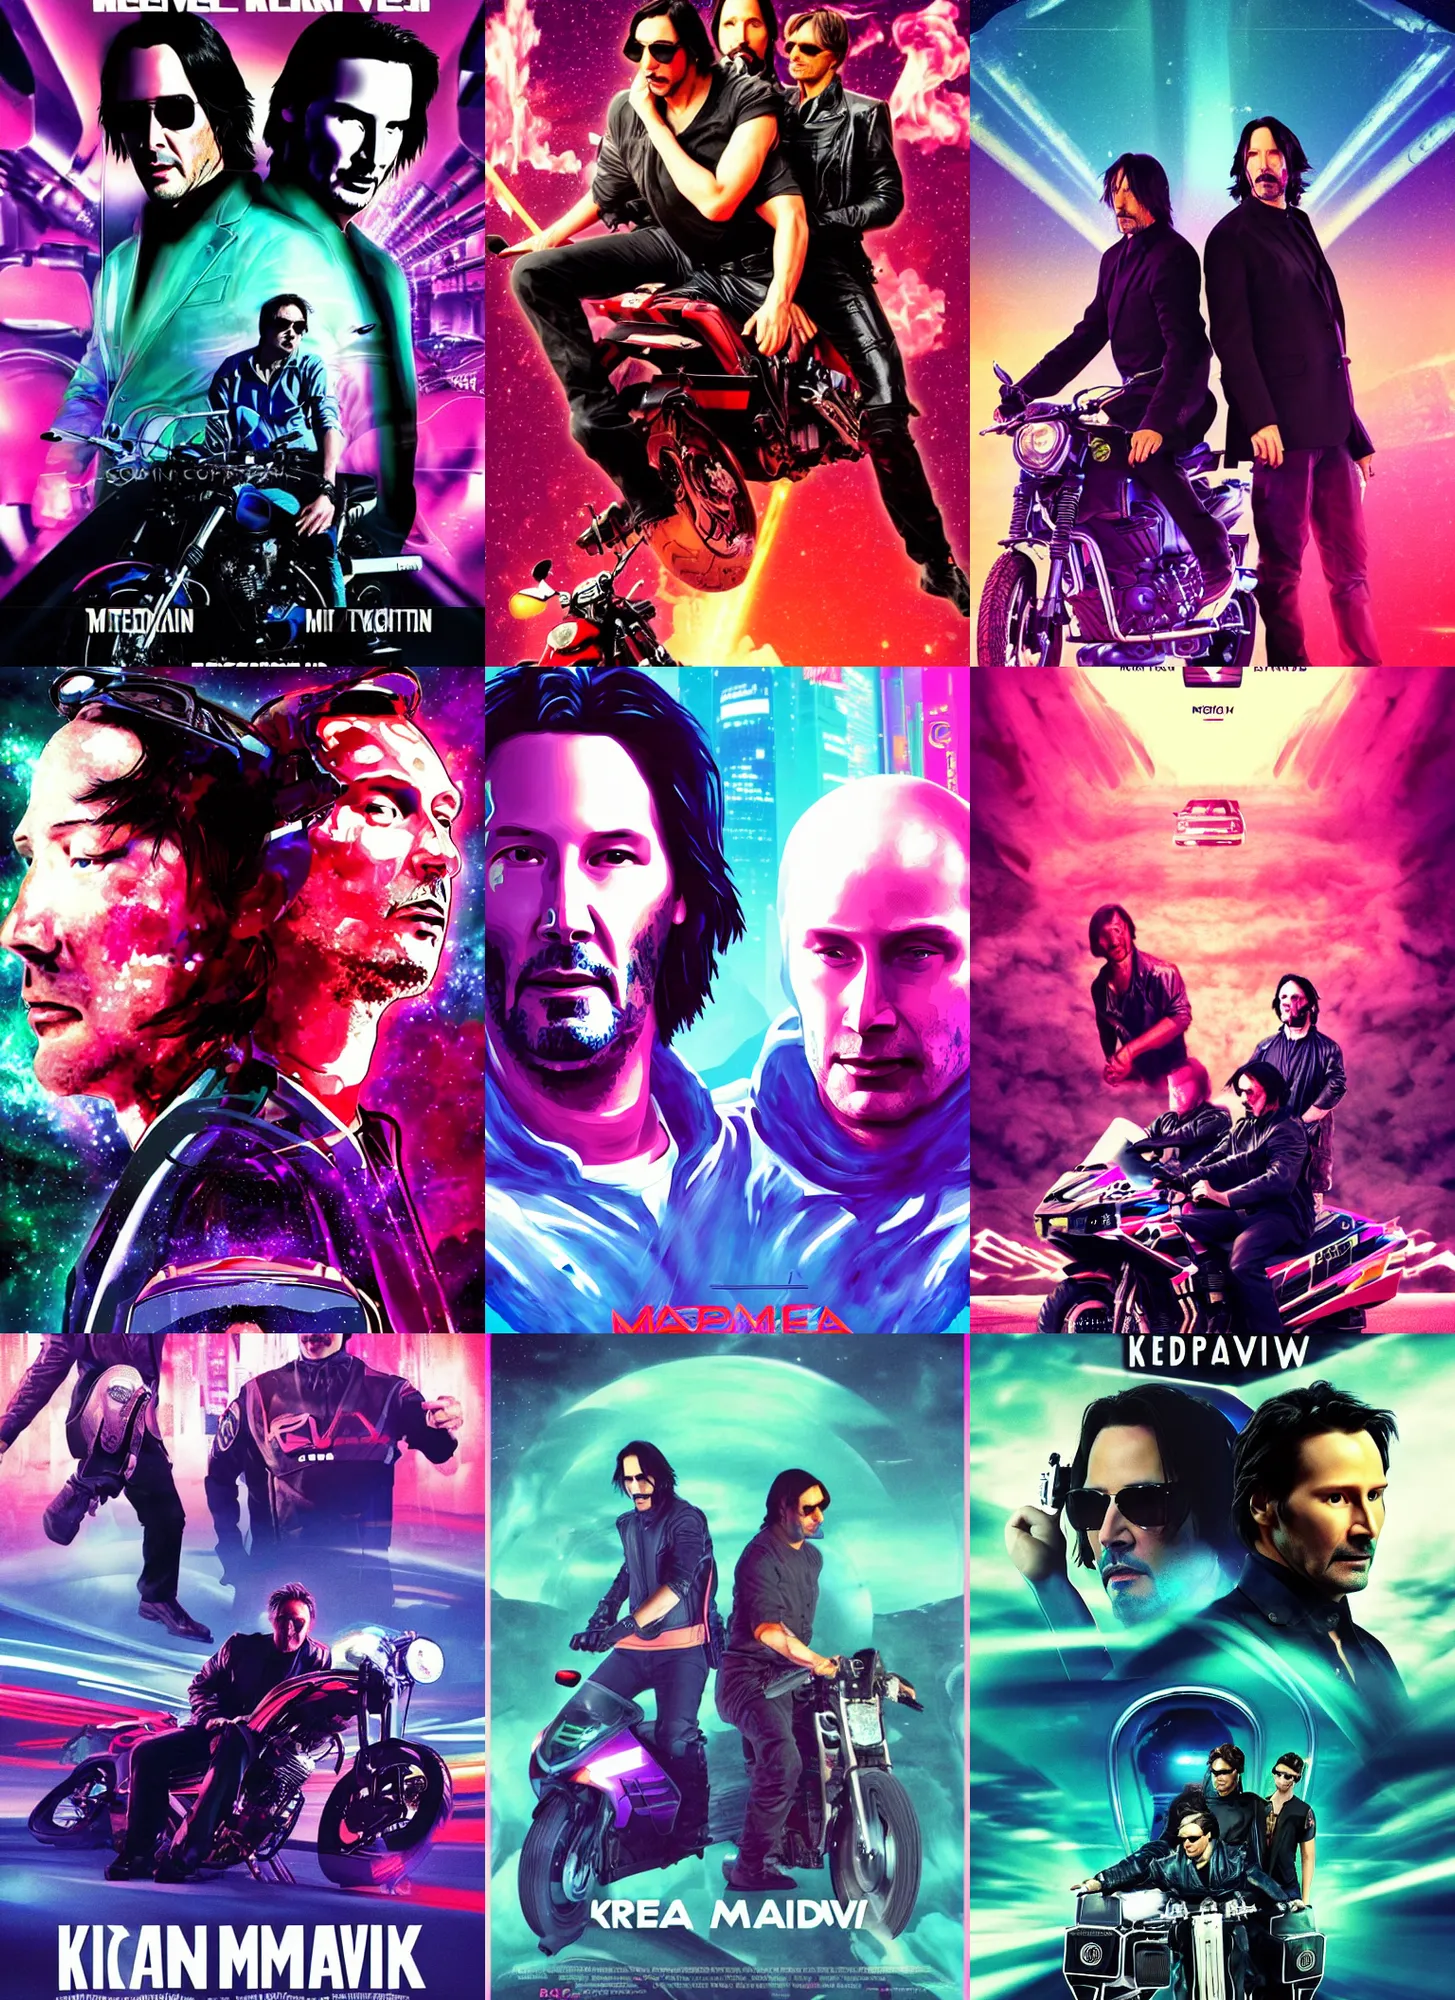 Prompt: sci-fi movie poster with Keanu Reeves and Mads Mikkelsen sitting on the same motor bike in vaporwave style